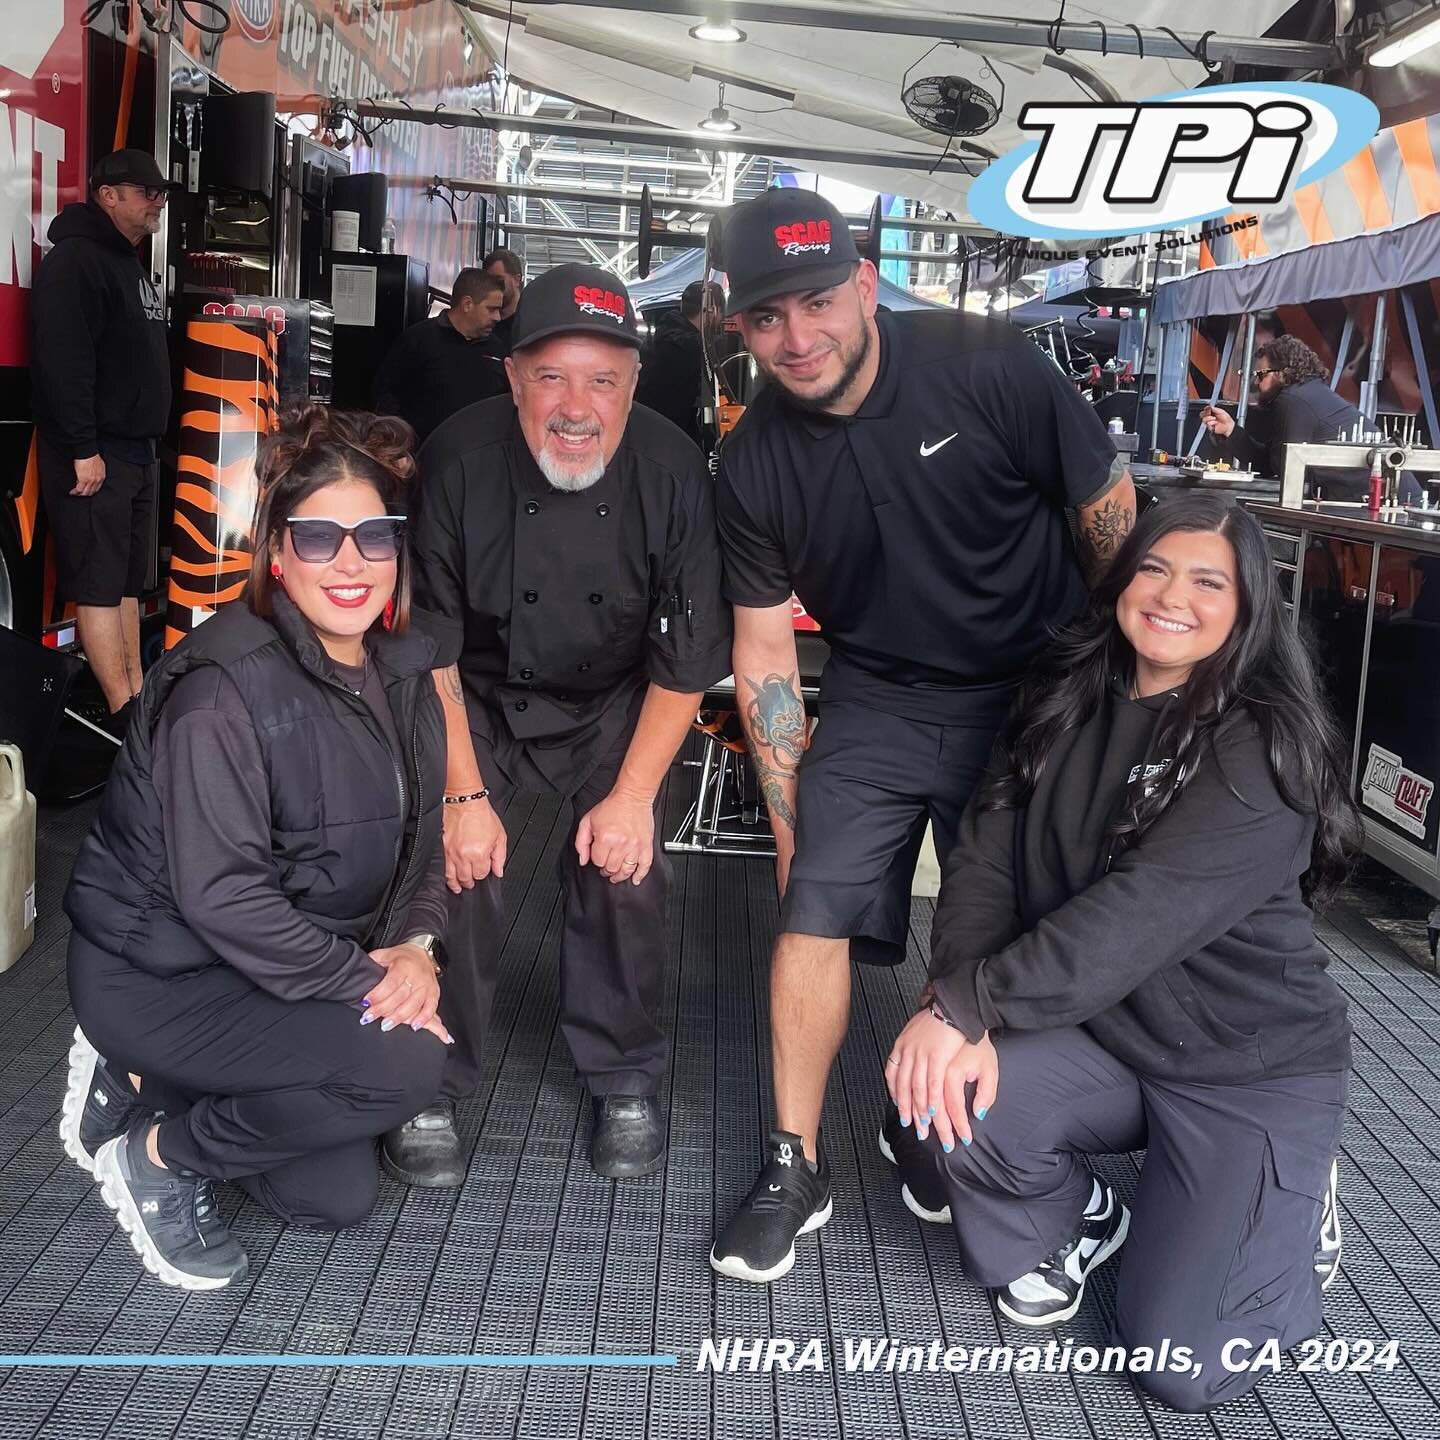 Oh HAIL Yeah! (Literally) ❄️

Despite a hail storm on the last day the TPI team had a great time at #nhrawinternationals at the @pomonadragstrip !! 

Being in events as long as we have we know the only thing to expect is the unexpected. But that&rsqu